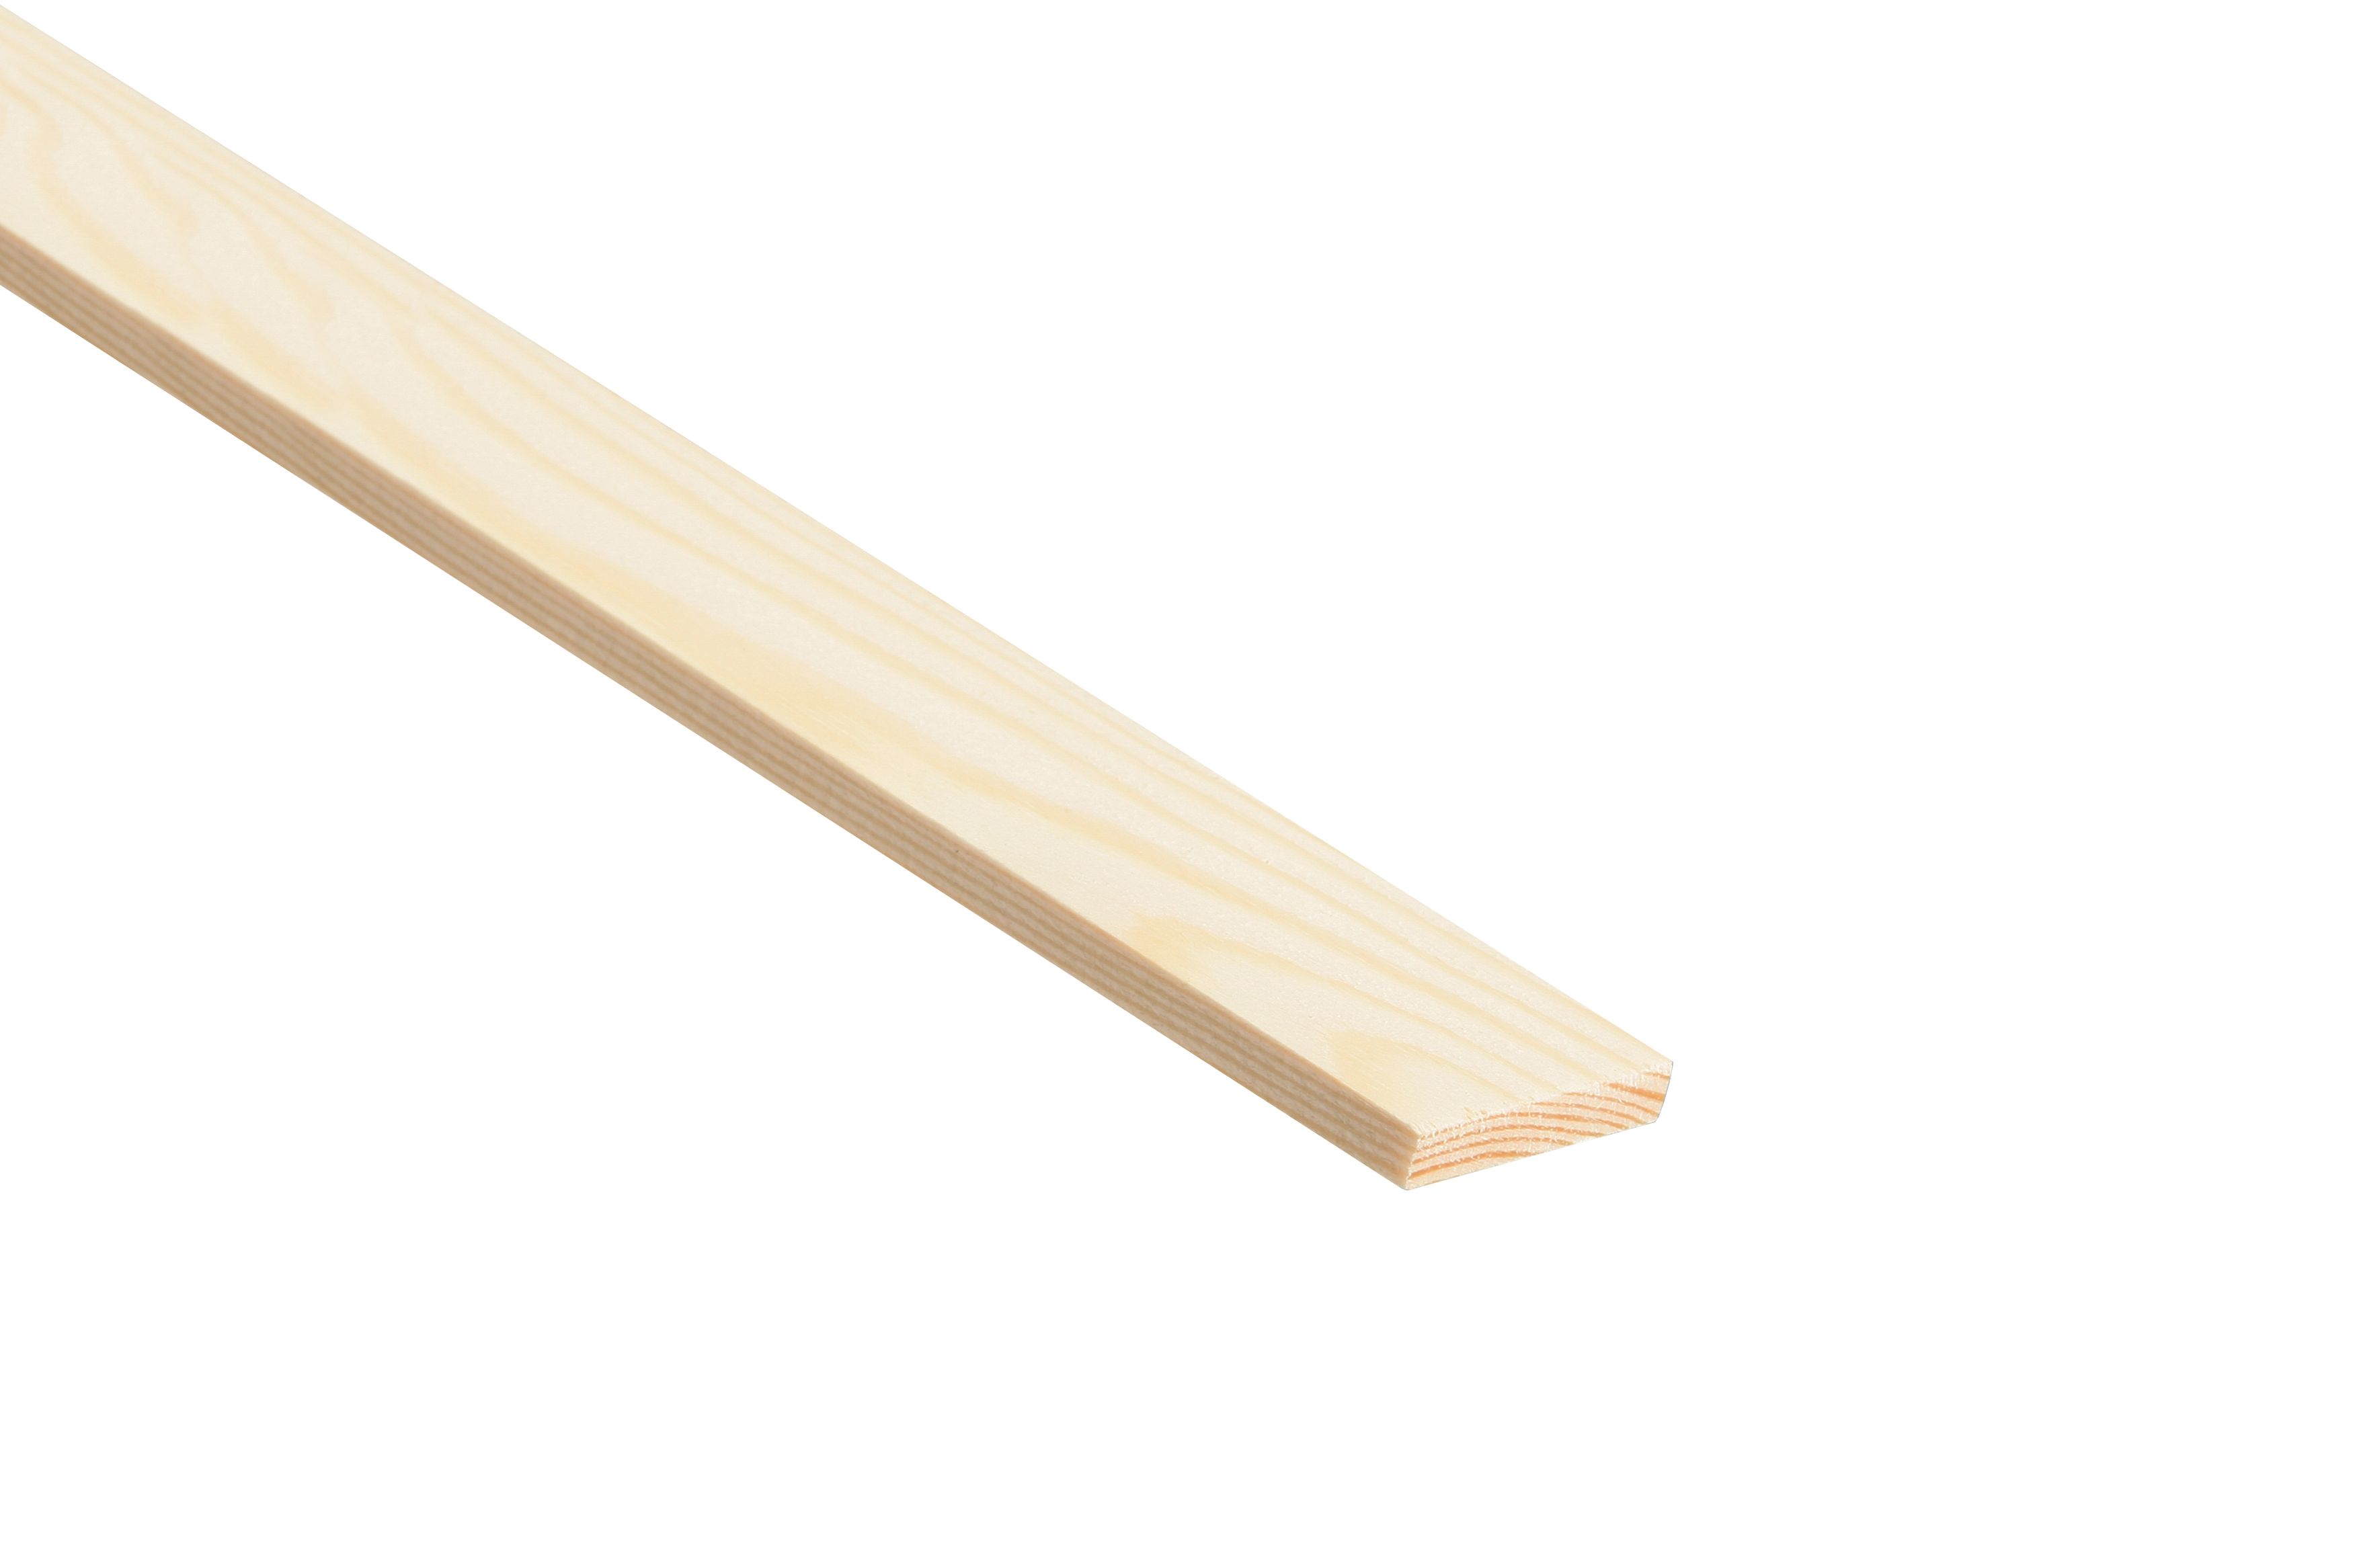 Image of Wickes Pine Stripwood Moulding (PSE) - 6 x 34 x 2400mm